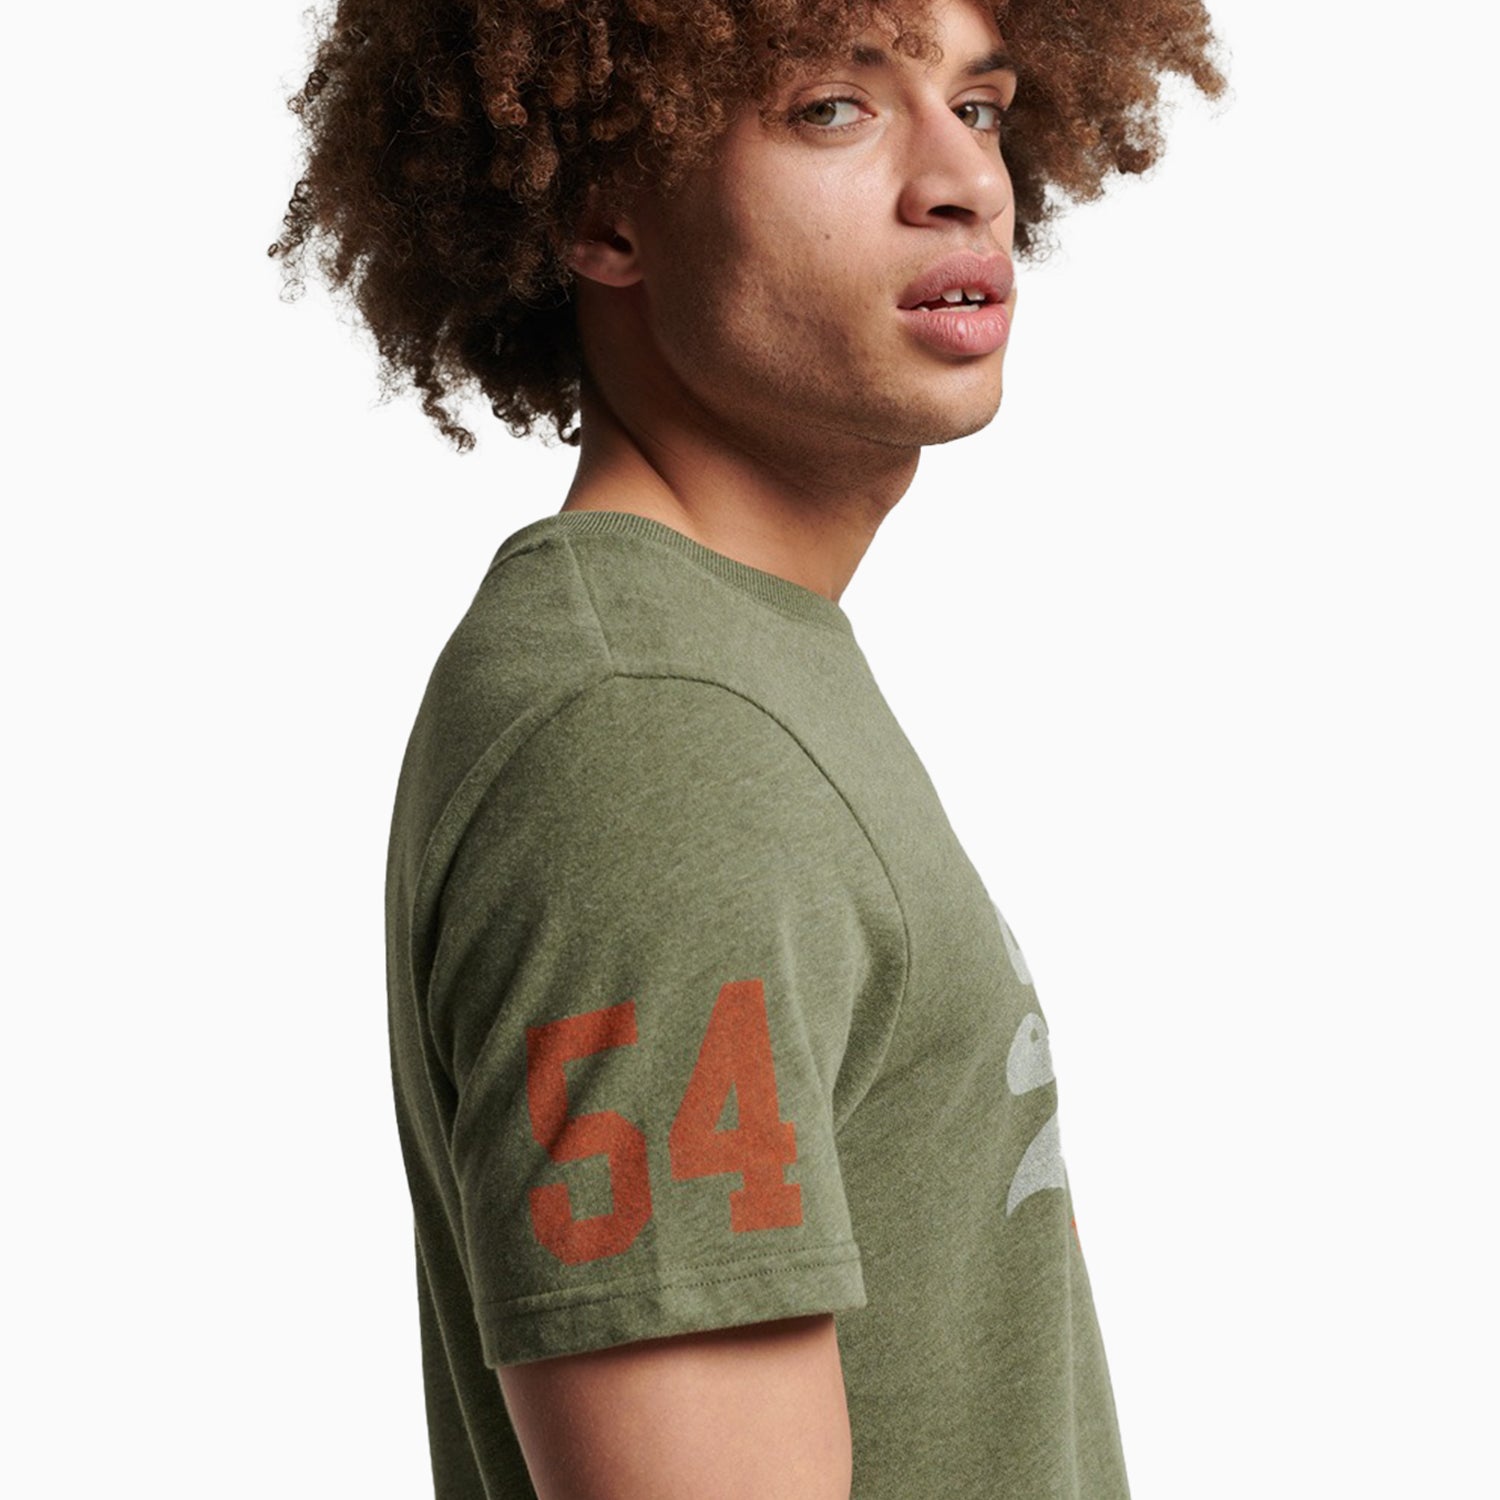 Superdry Men's Classic Graphic Logo T Shirt - Color: Olive Marl - Tops and Bottoms USA -